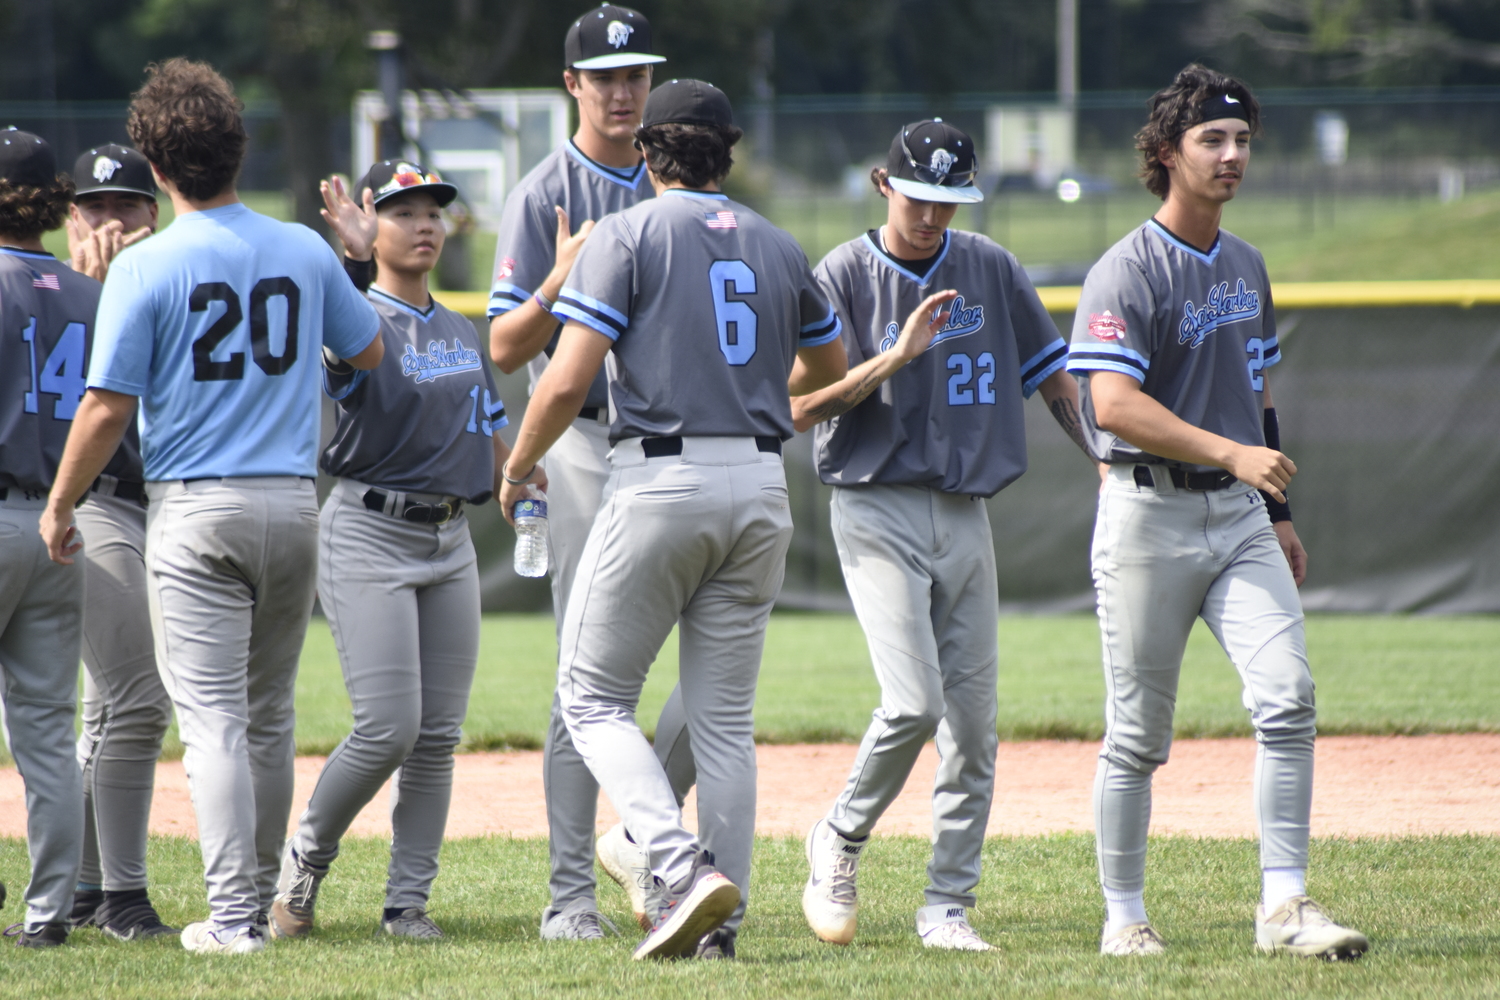 A doubleheader sweep of the Aviators on Saturday helped the Sag Harbor Whalers earn the second seed in the HCBL playoffs which began on Tuesday. The Whalers are playing the South Shore Clippers in their best-of-three semifinal series.   DREW BUDD